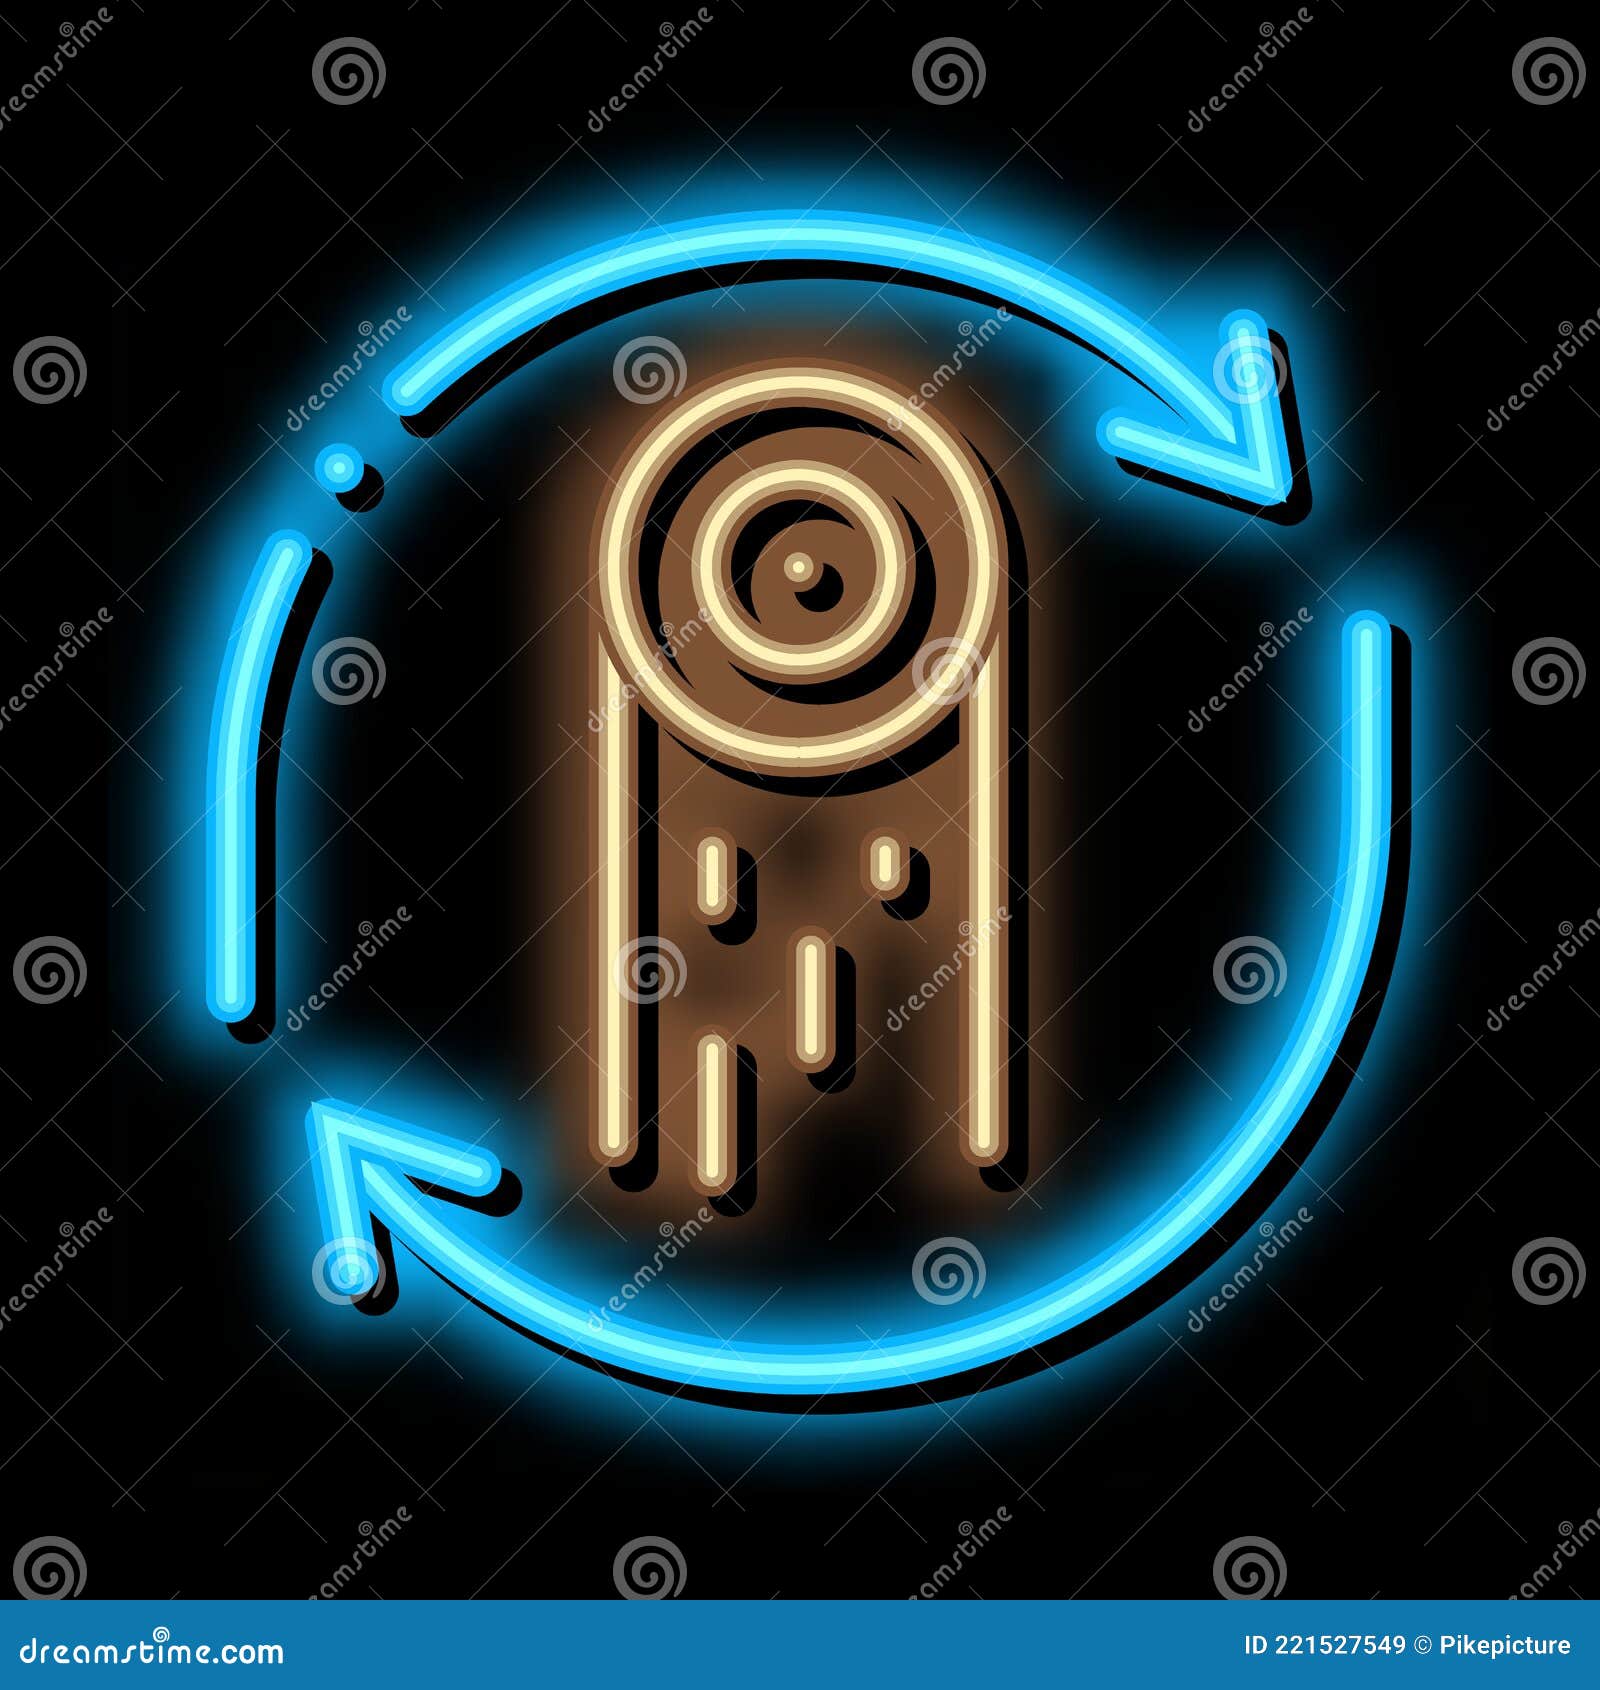 wood material cicle neon glow icon 